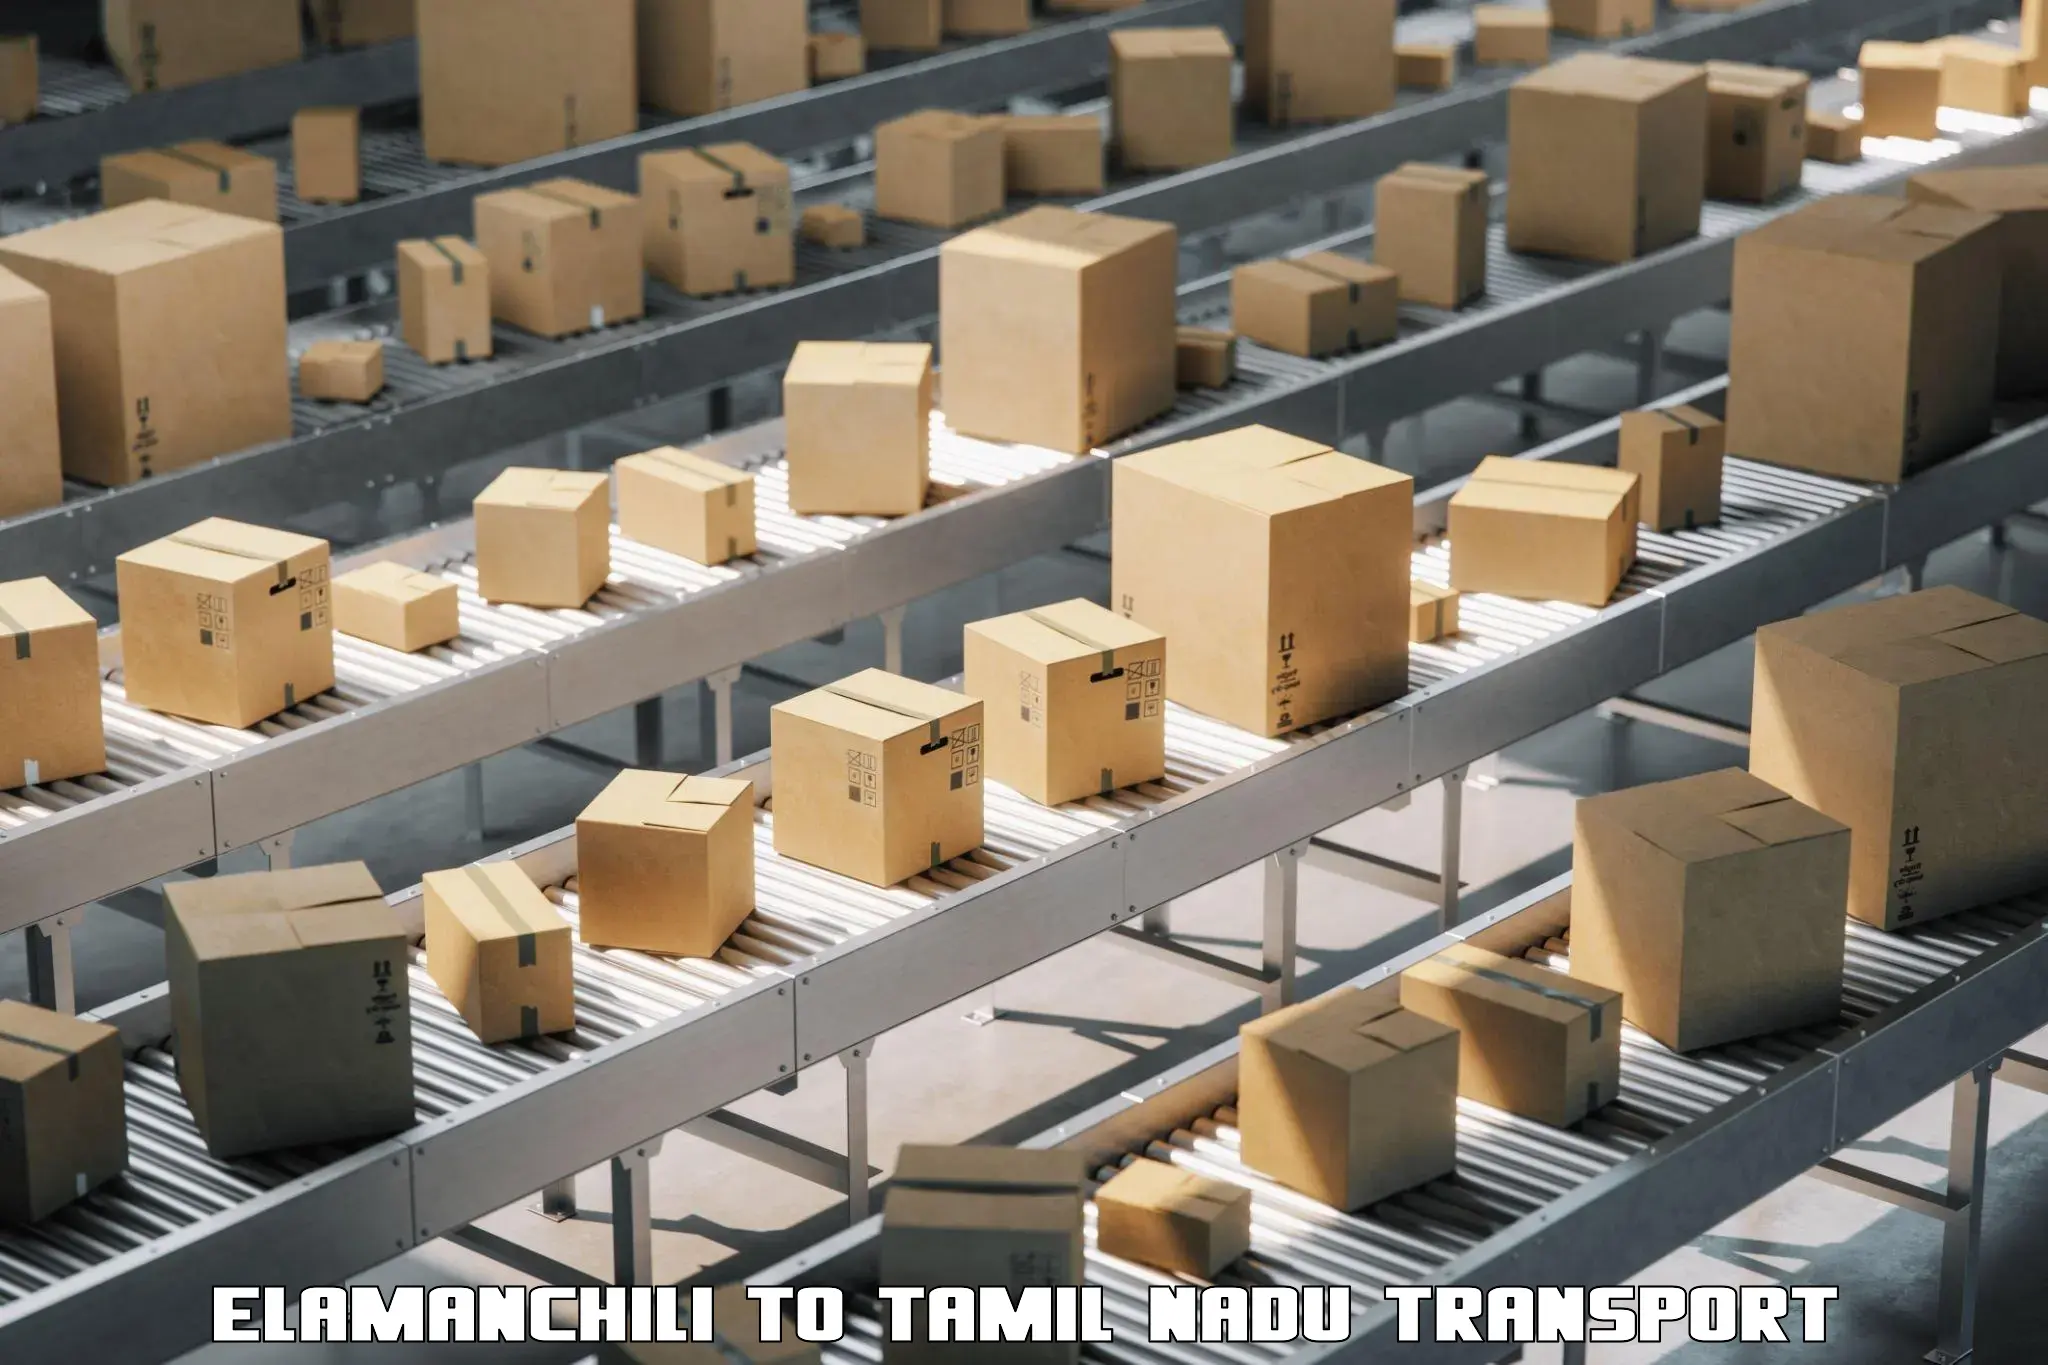 Truck transport companies in India Elamanchili to Nagercoil